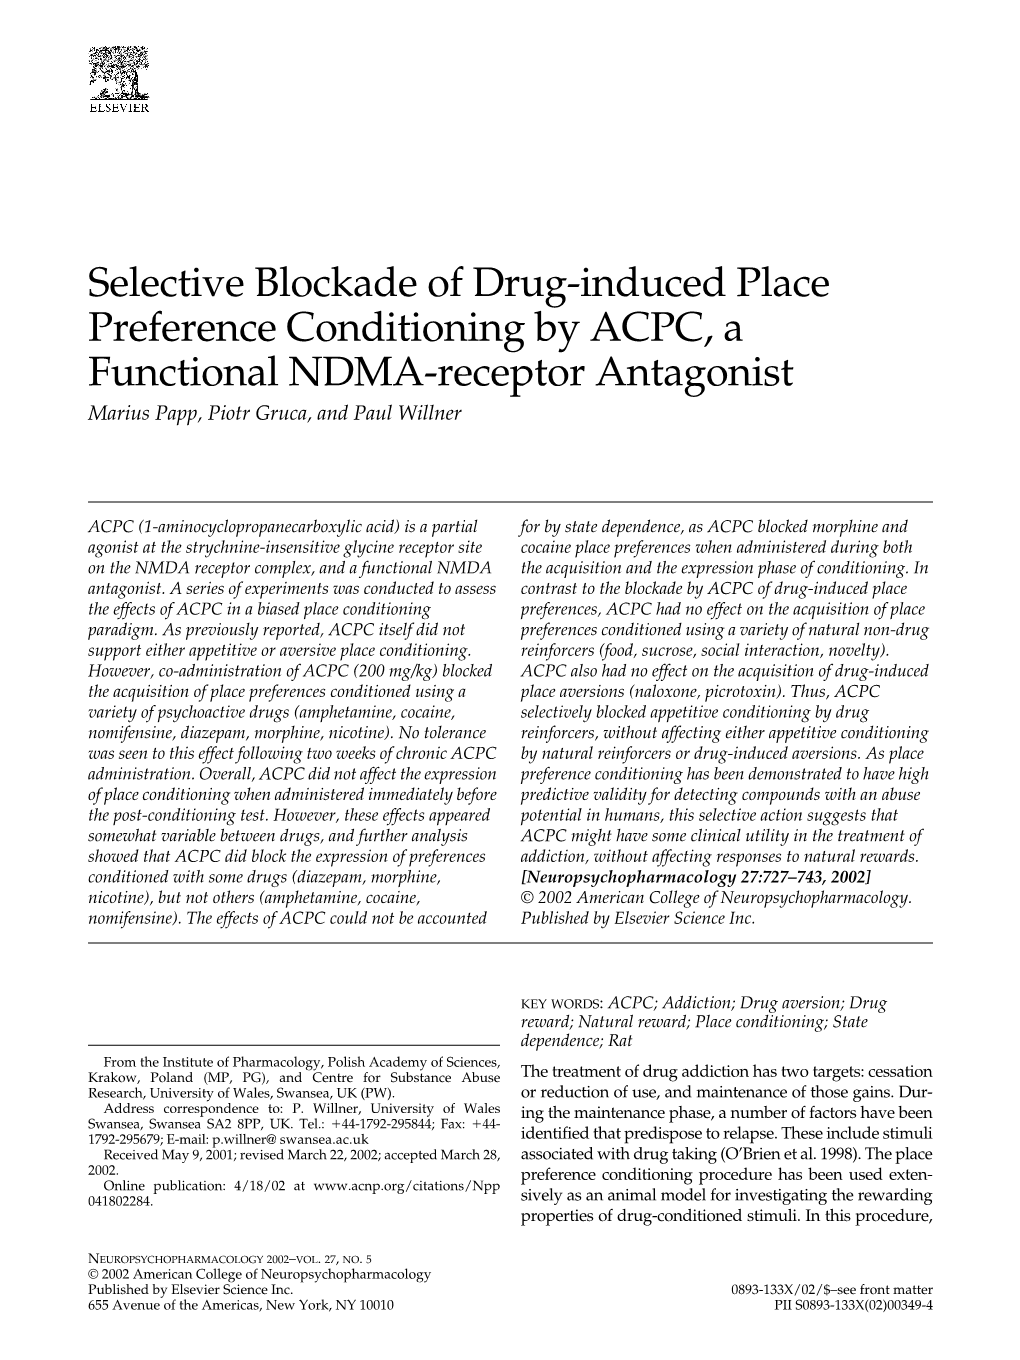 Selective Blockade of Drug-Induced Place Preference Conditioning by ACPC, a Functional NDMA-Receptor Antagonist Marius Papp, Piotr Gruca, and Paul Willner